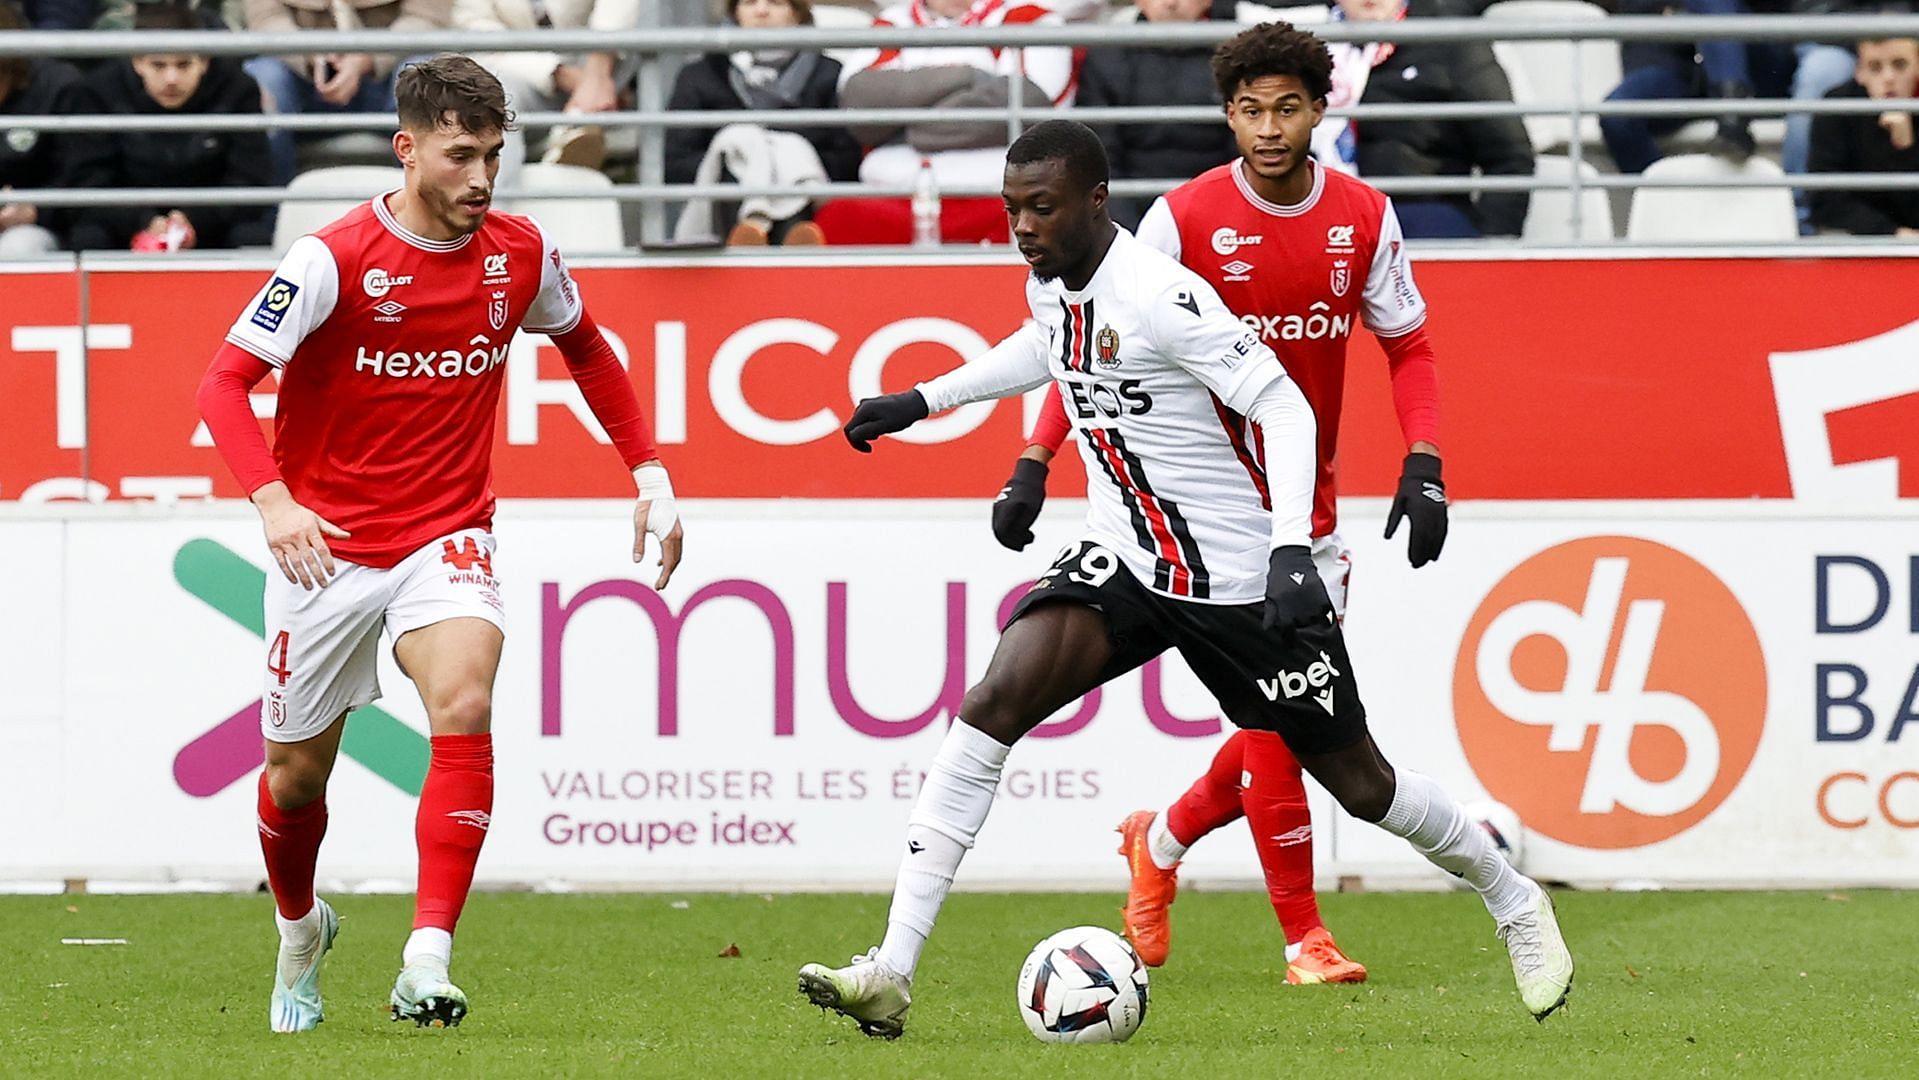 Nice and Reims will lock horns in Ligue 1 on Saturday